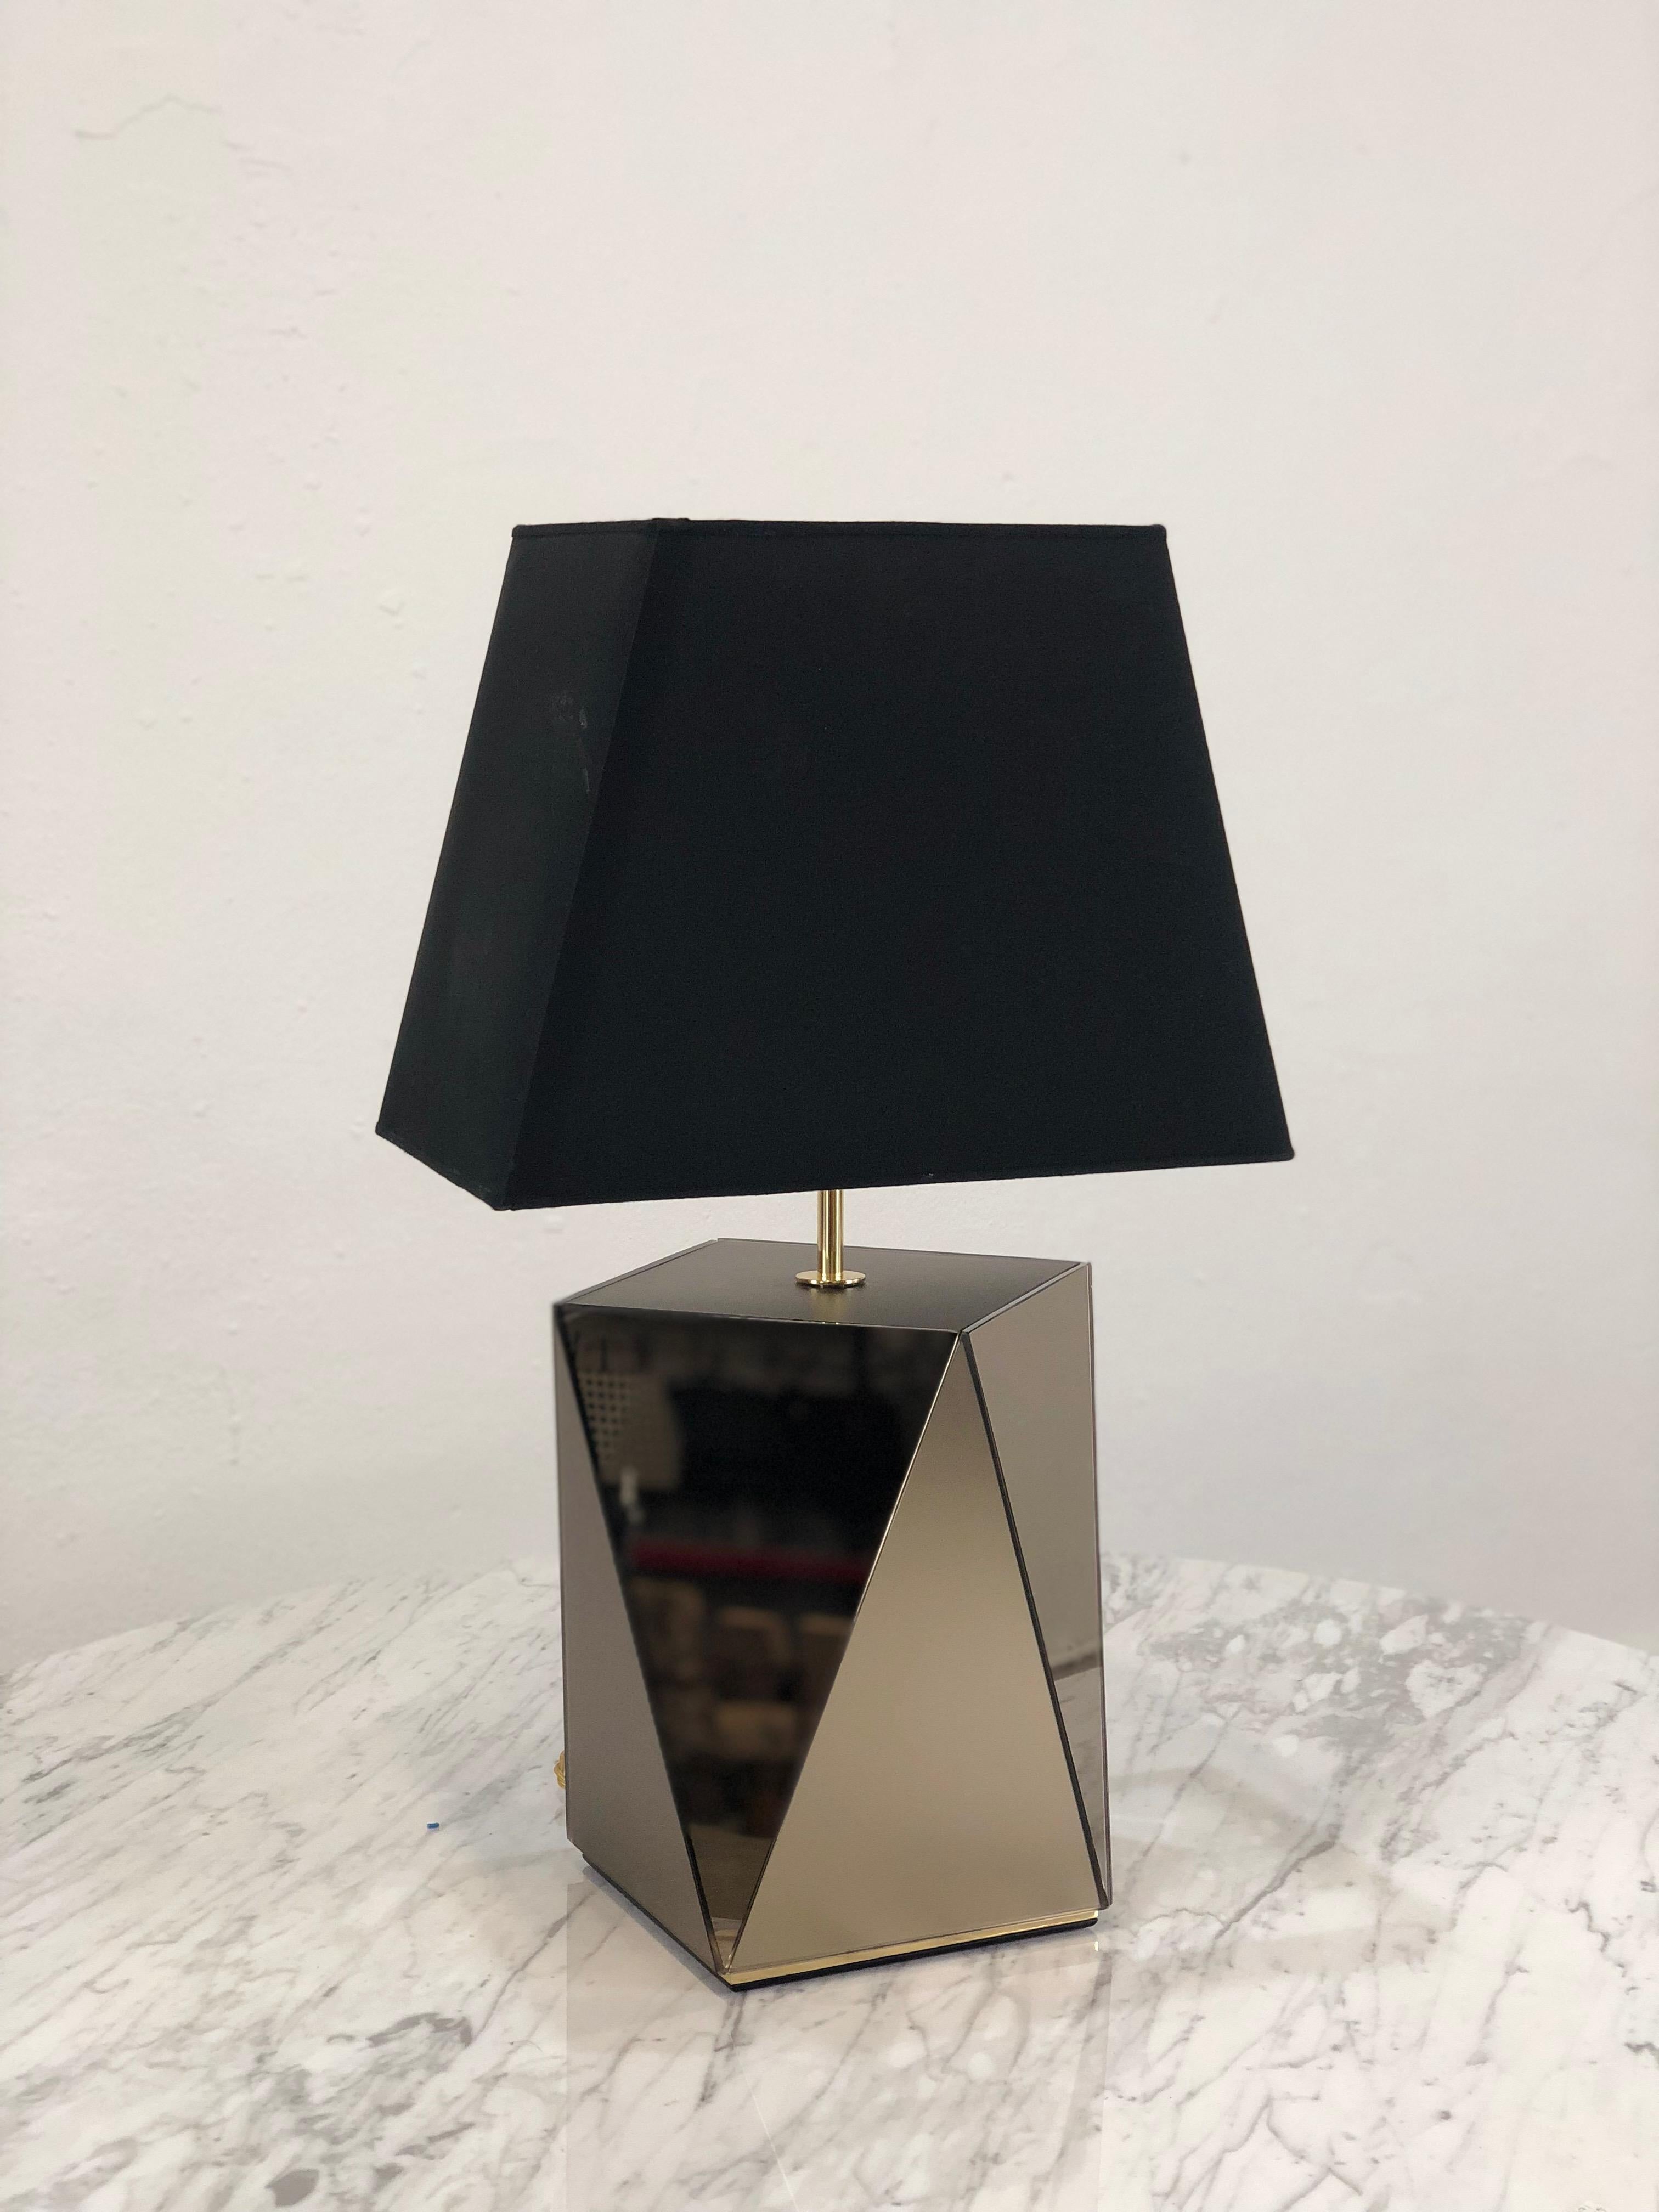 Splendid pair of table lamps in mirrored glass made in the late 90's, of fine Italian manufacture.
The base of the lamps is made of mirrored and satin glass, has very beautiful and elegant shapes, hexagonal in shape that create a special